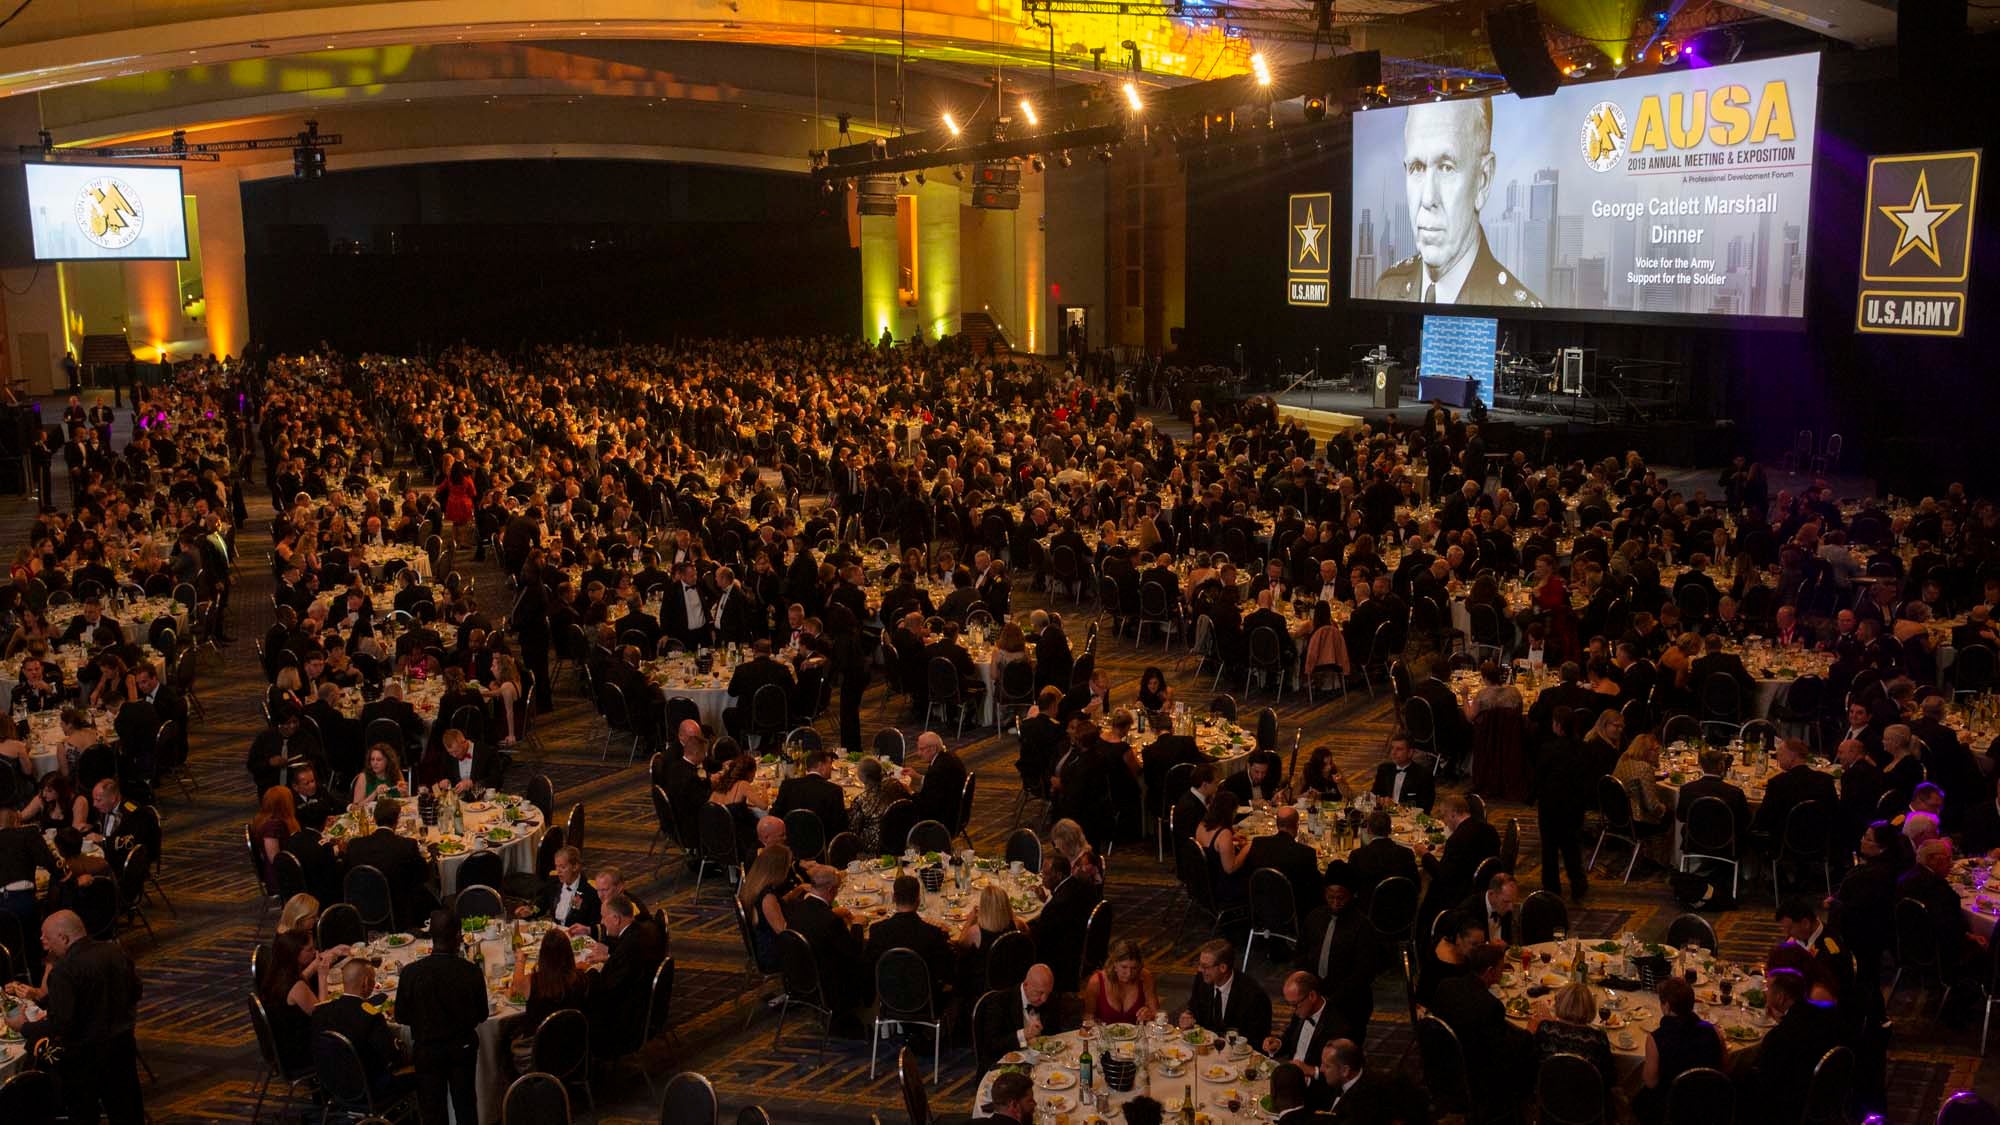 Aerial view of 2019 Marshall Dinner